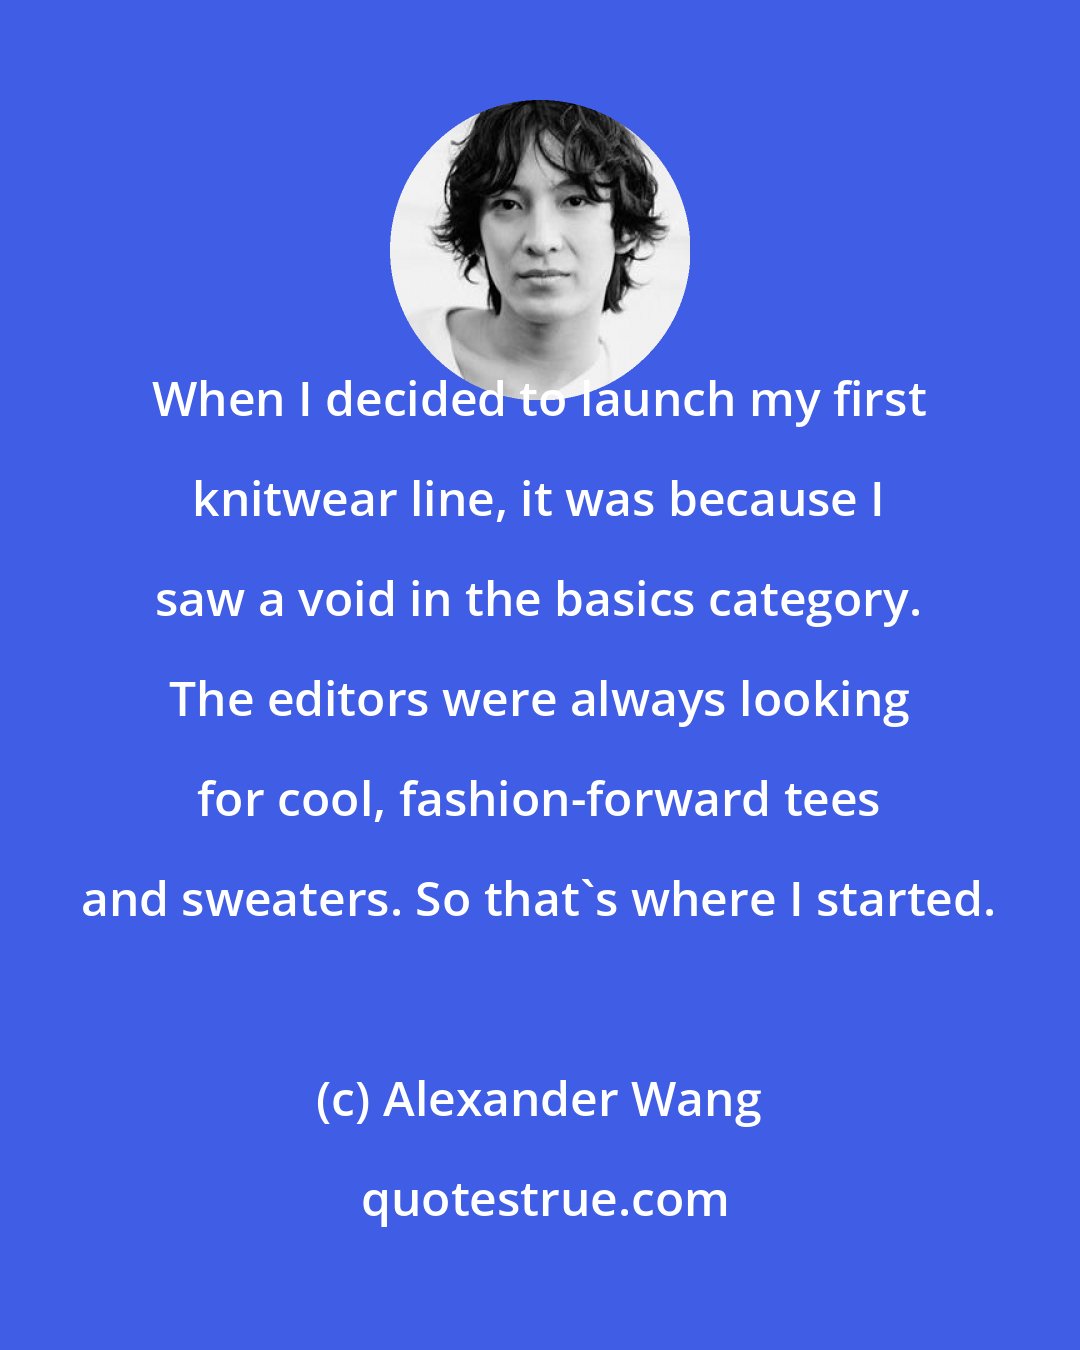 Alexander Wang: When I decided to launch my first knitwear line, it was because I saw a void in the basics category. The editors were always looking for cool, fashion-forward tees and sweaters. So that's where I started.